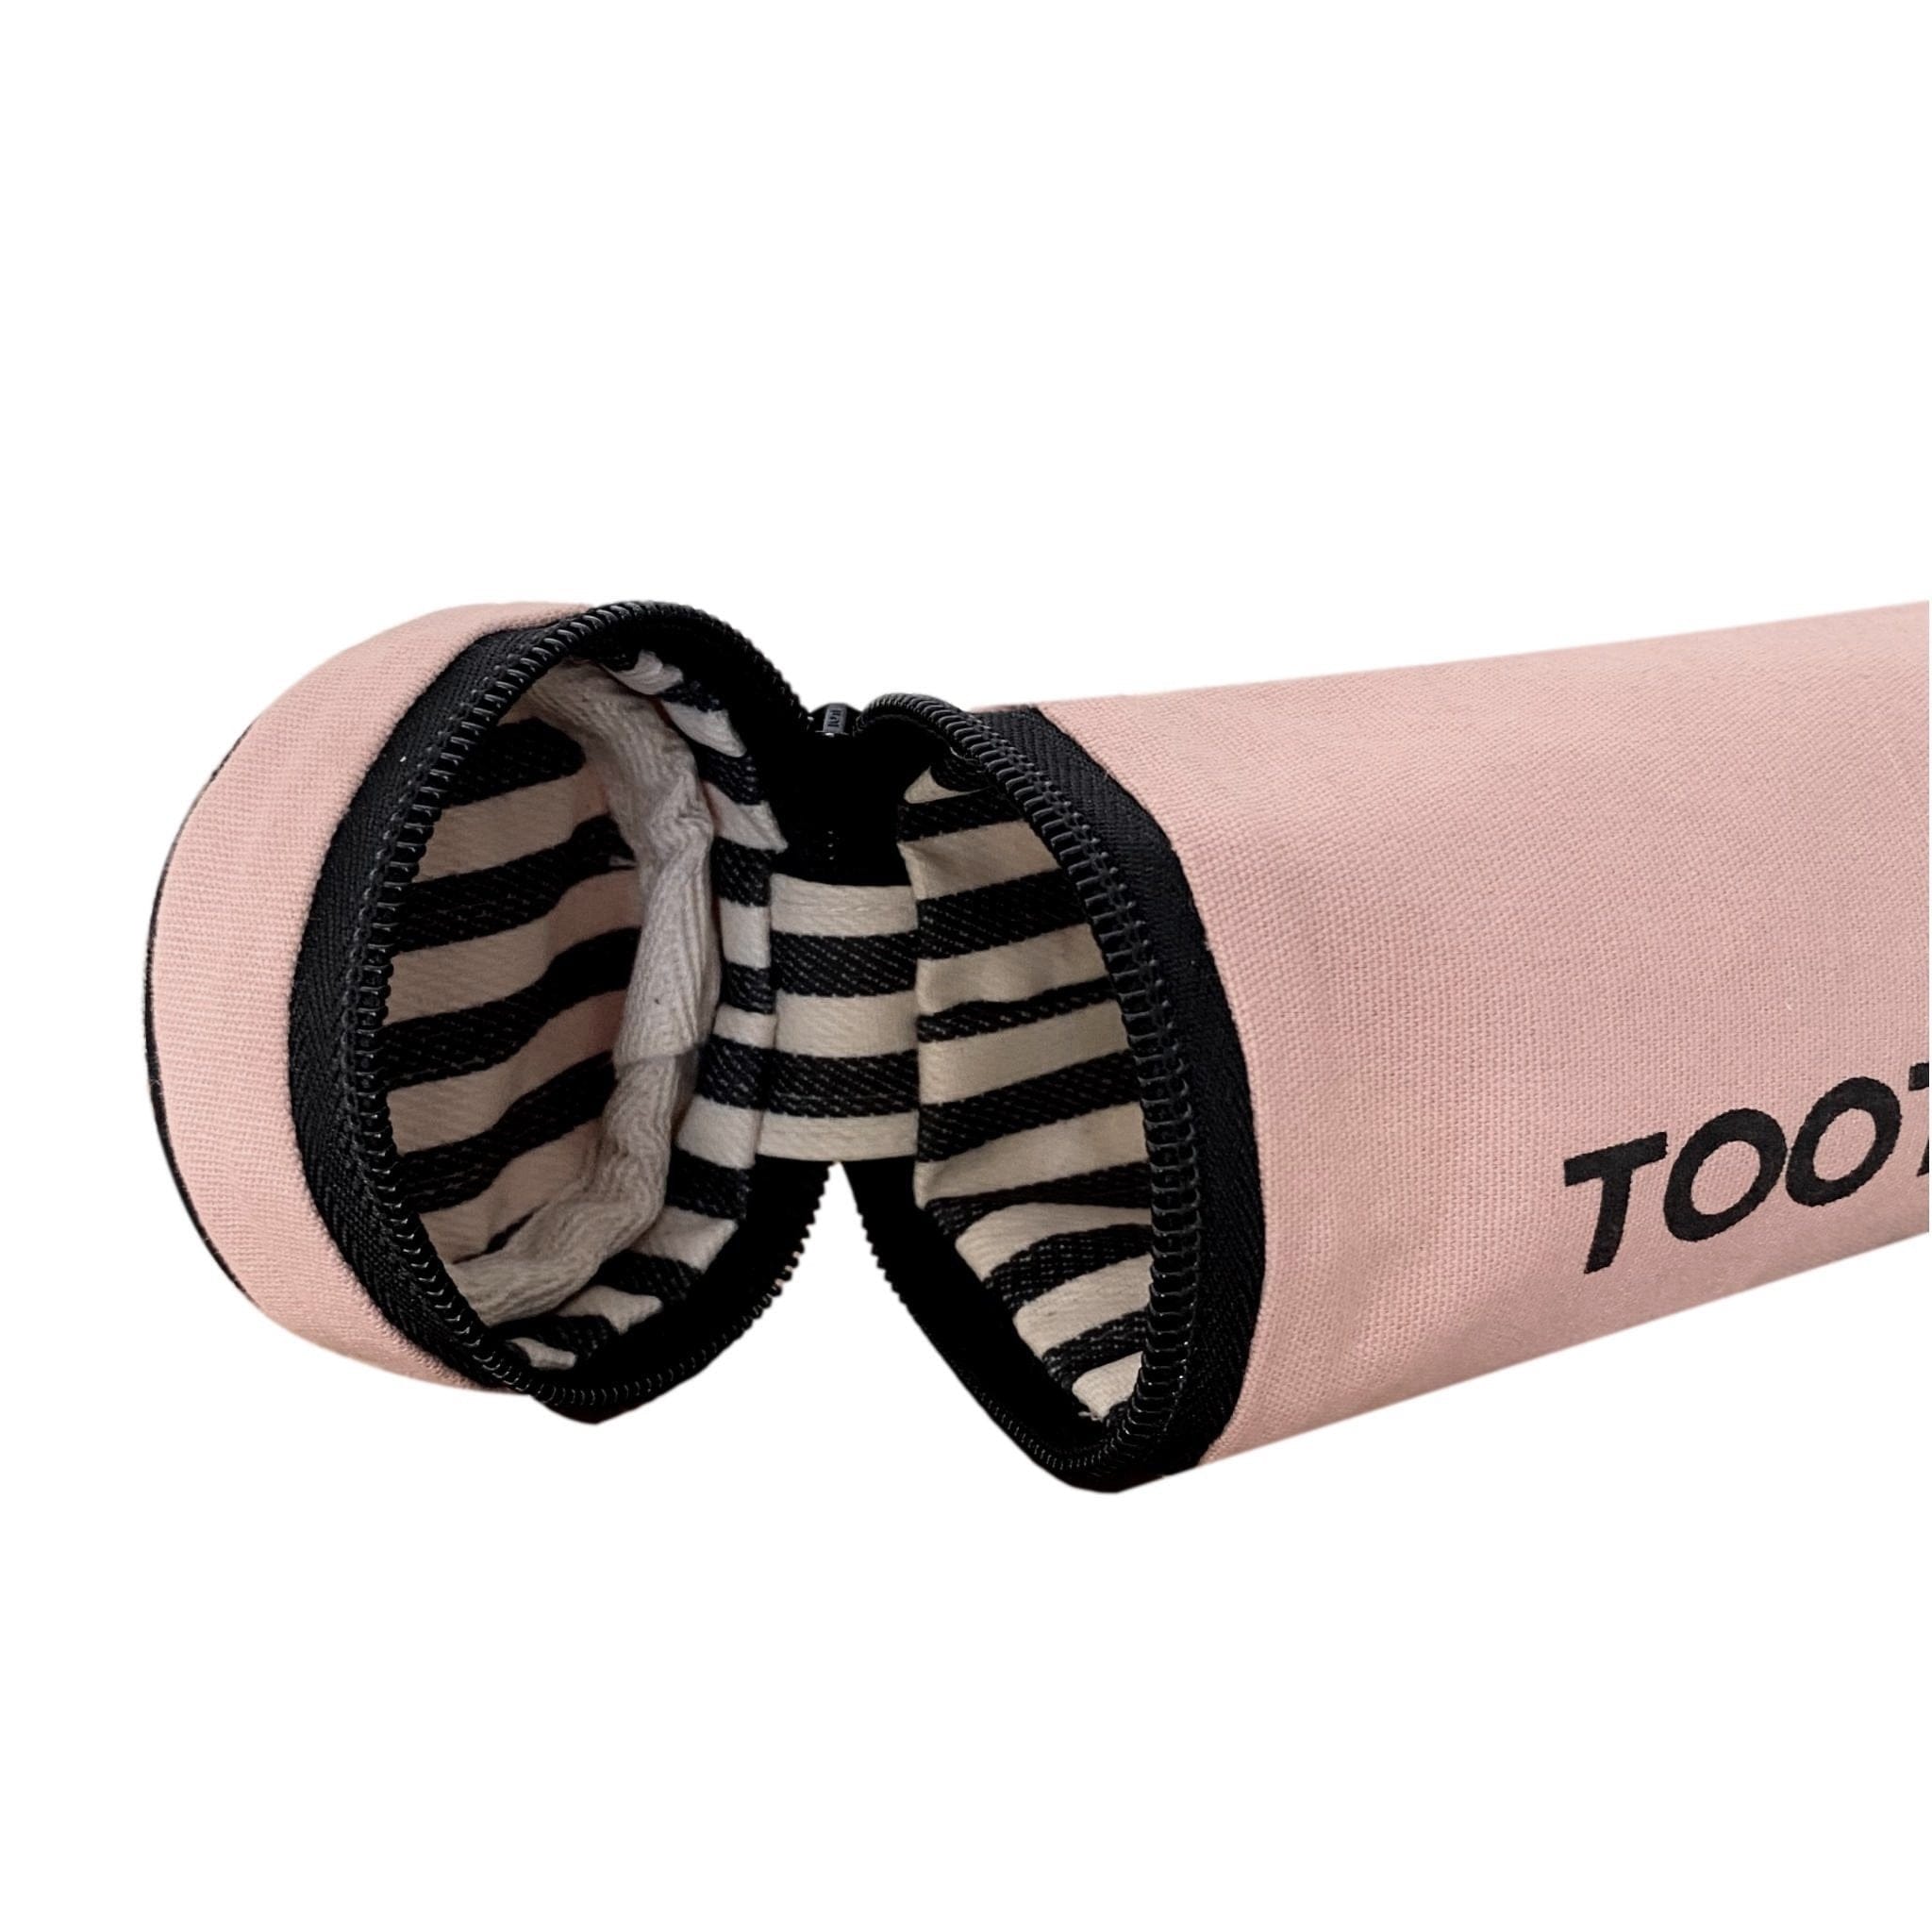 The zippered opening to the travel pink toothbrush case. 